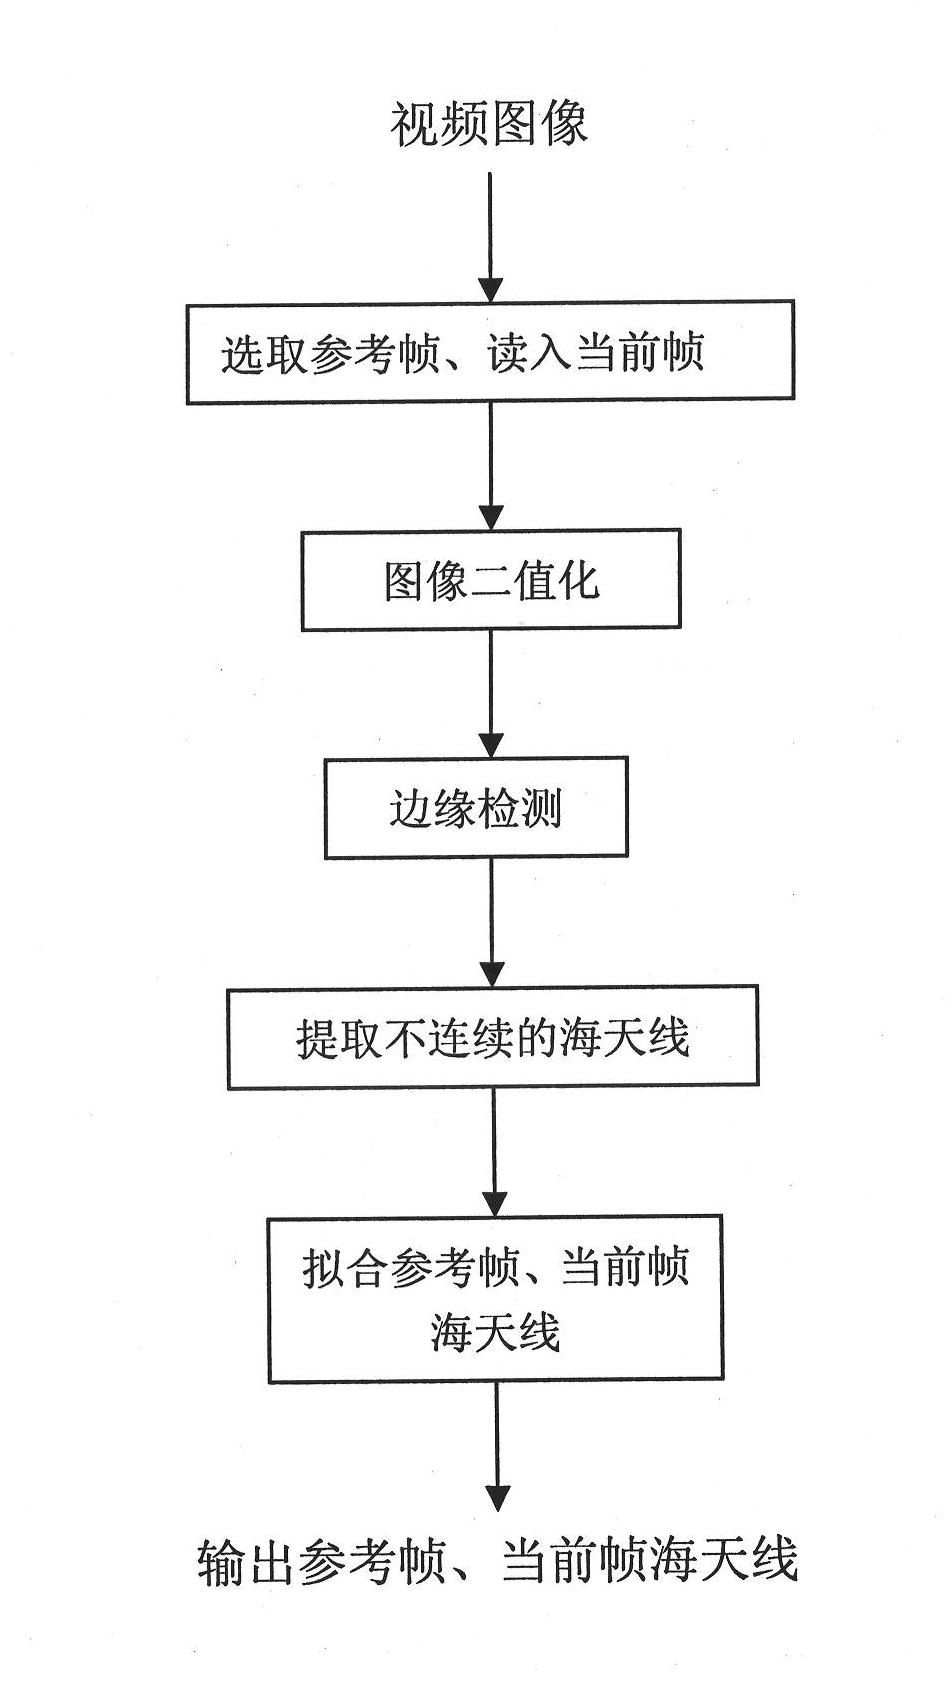 Electronic image stabilization method based on characteristic straight line of ship-borne camera system